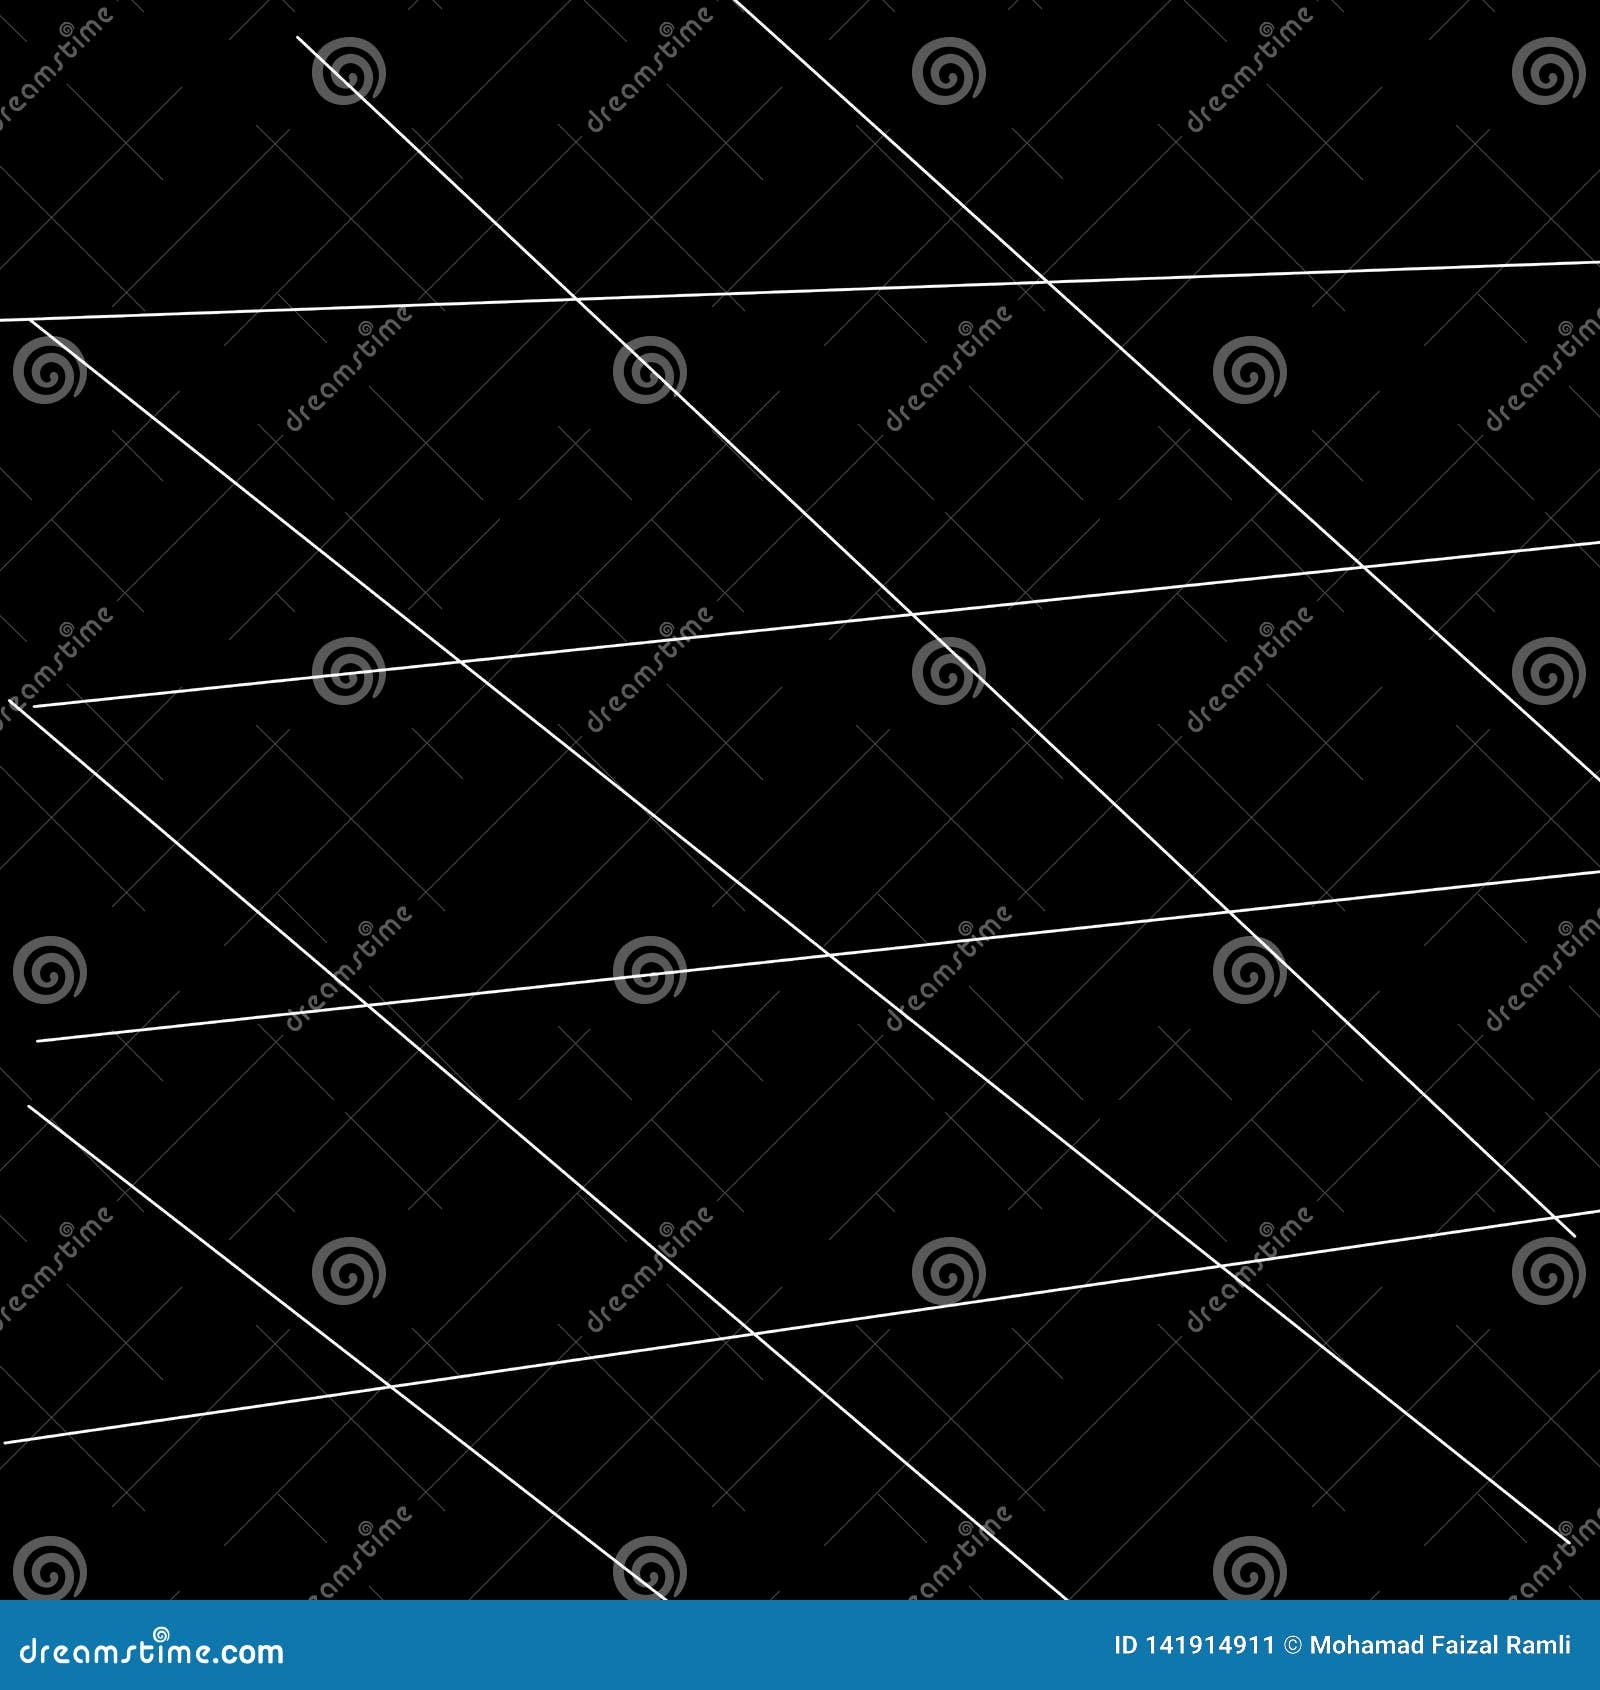 Abstract Black and White Square Grid Pattern As Illustration Background